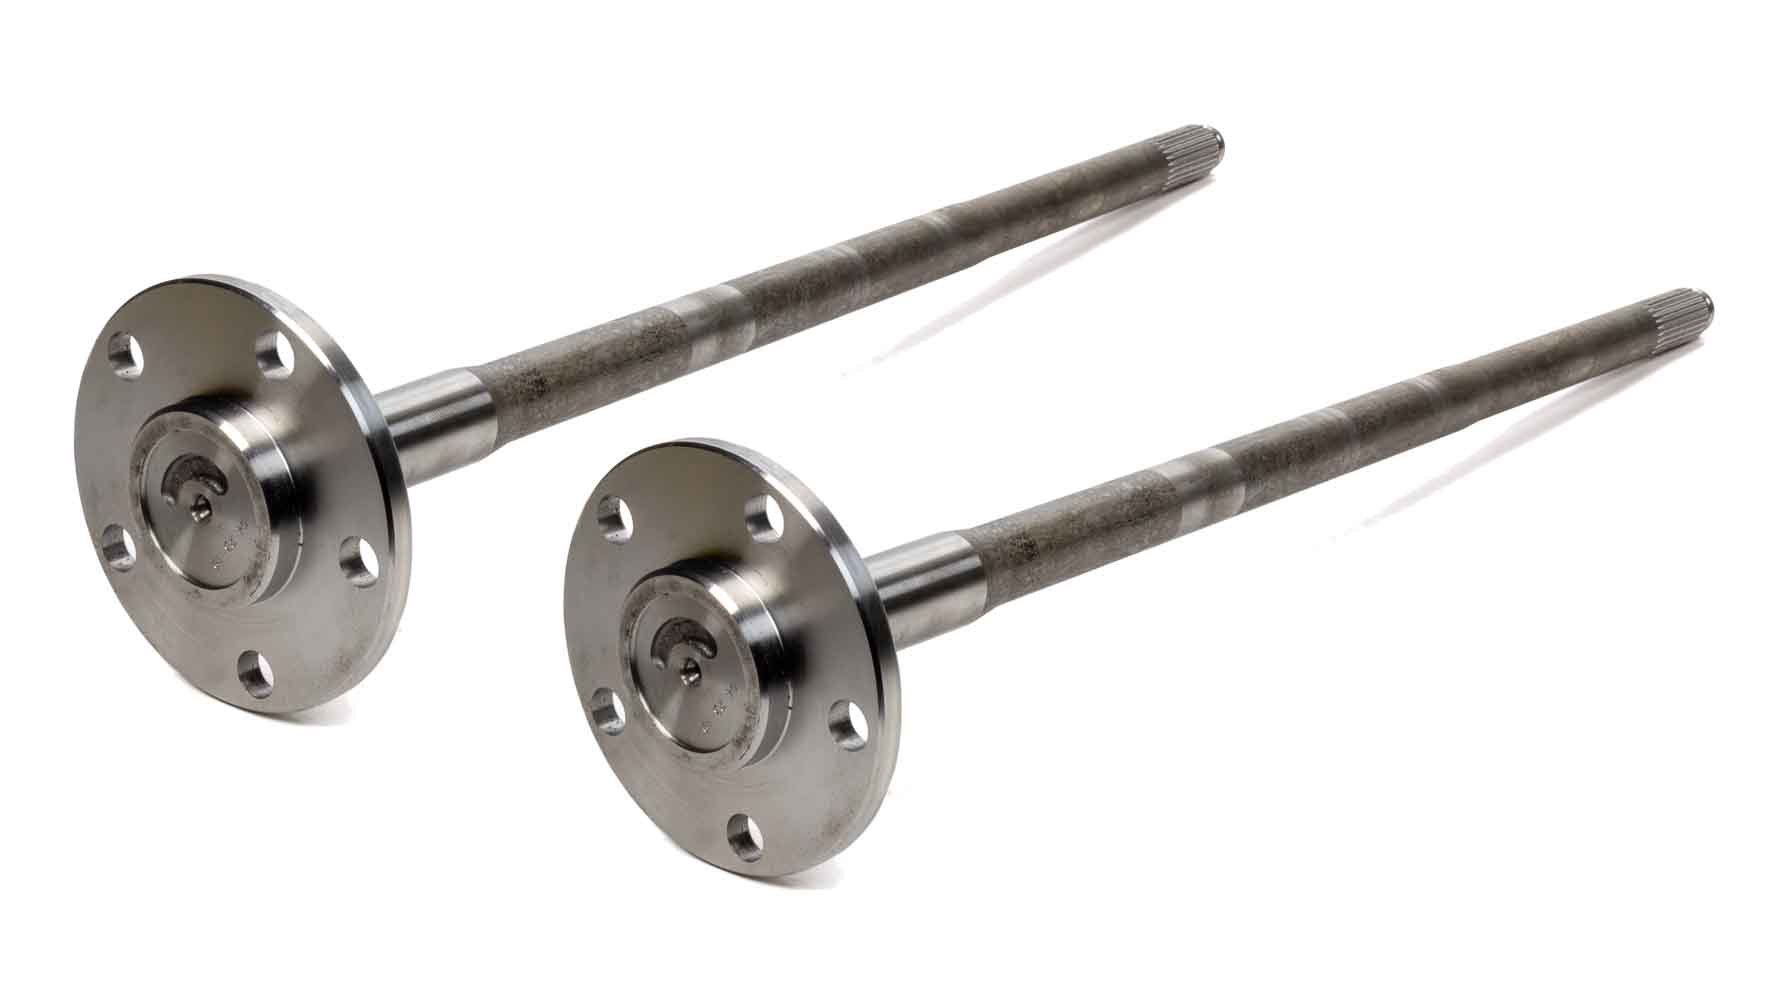 Moser Engineering A102601CT-4750 Axle Shaft, 28-7/16 in Long, 26 Spline Carrier, 5 x 4.75 in Bolt Pattern, C-Clip, Steel, Natural, GM 10-Bolt, Pair